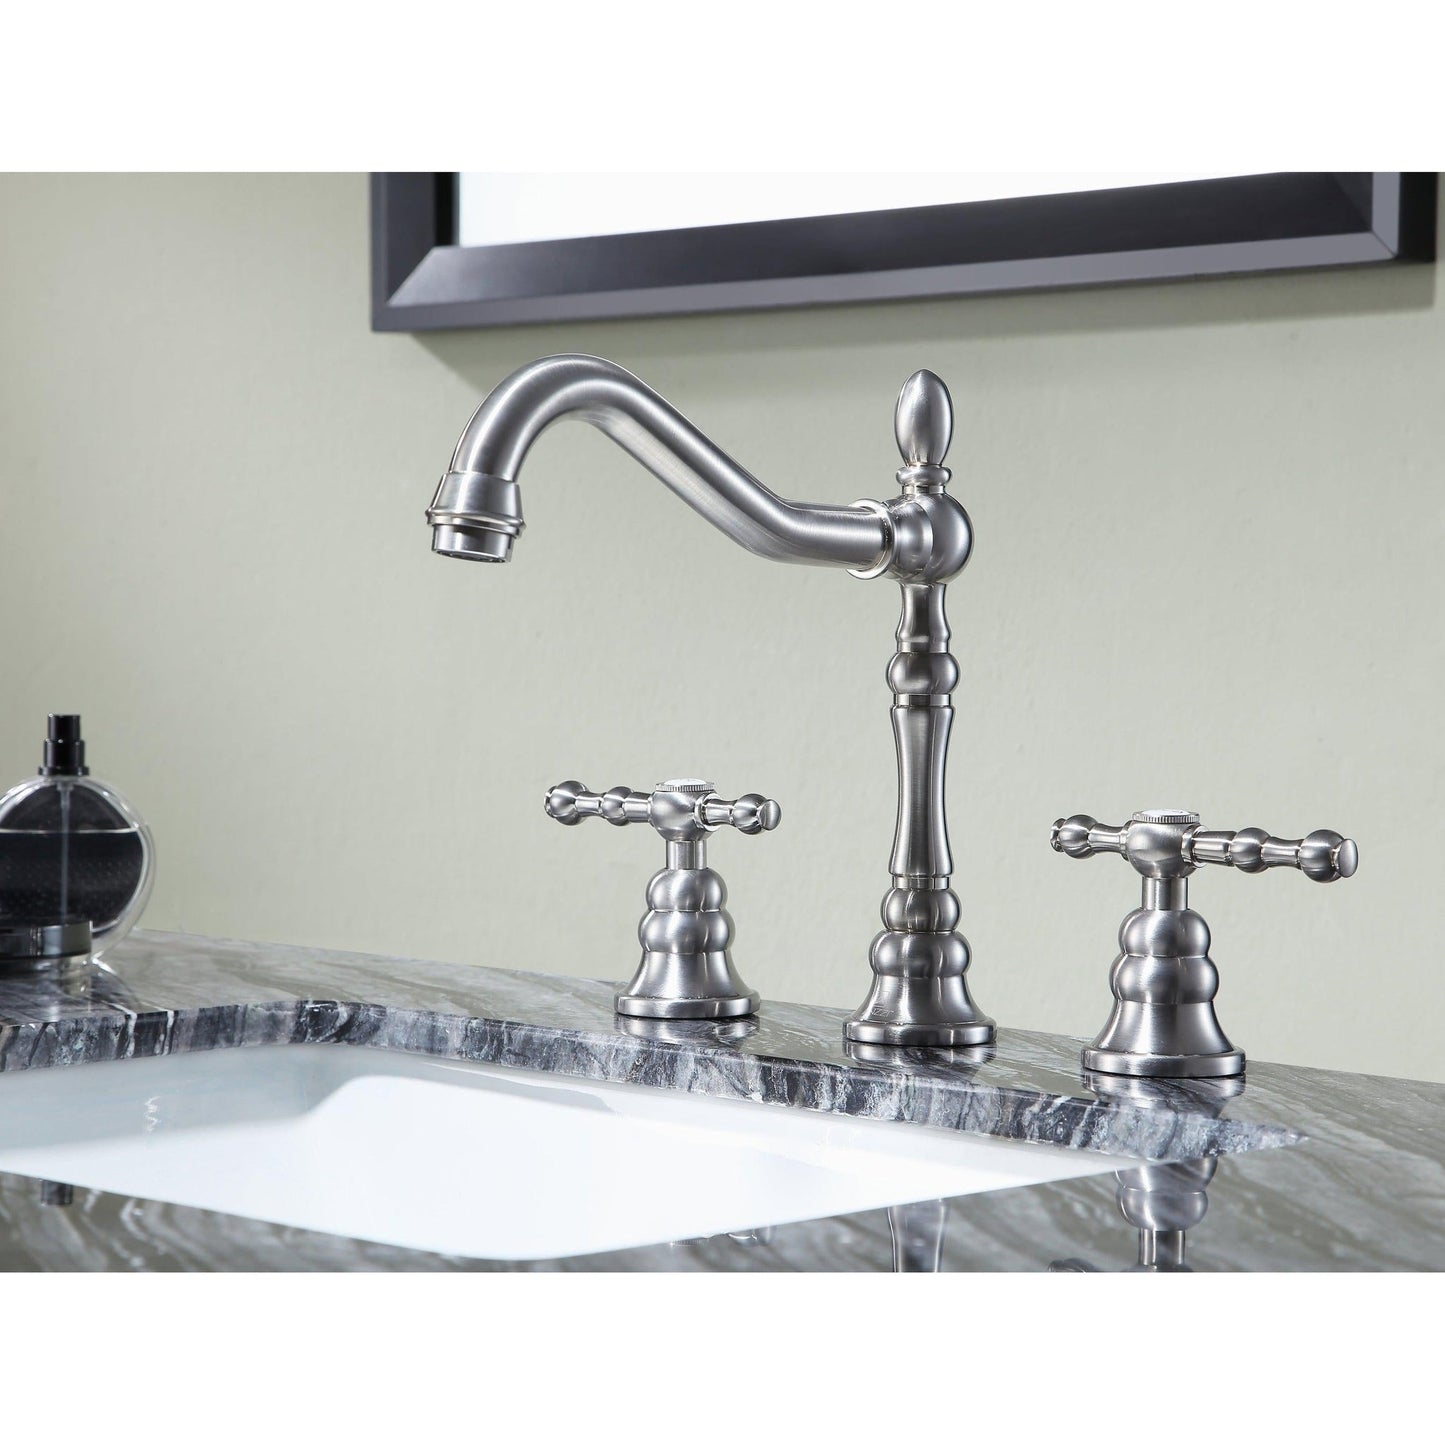 ANZZI Highland Series 6" Widespread Brushed Nickel Bathroom Sink Faucet